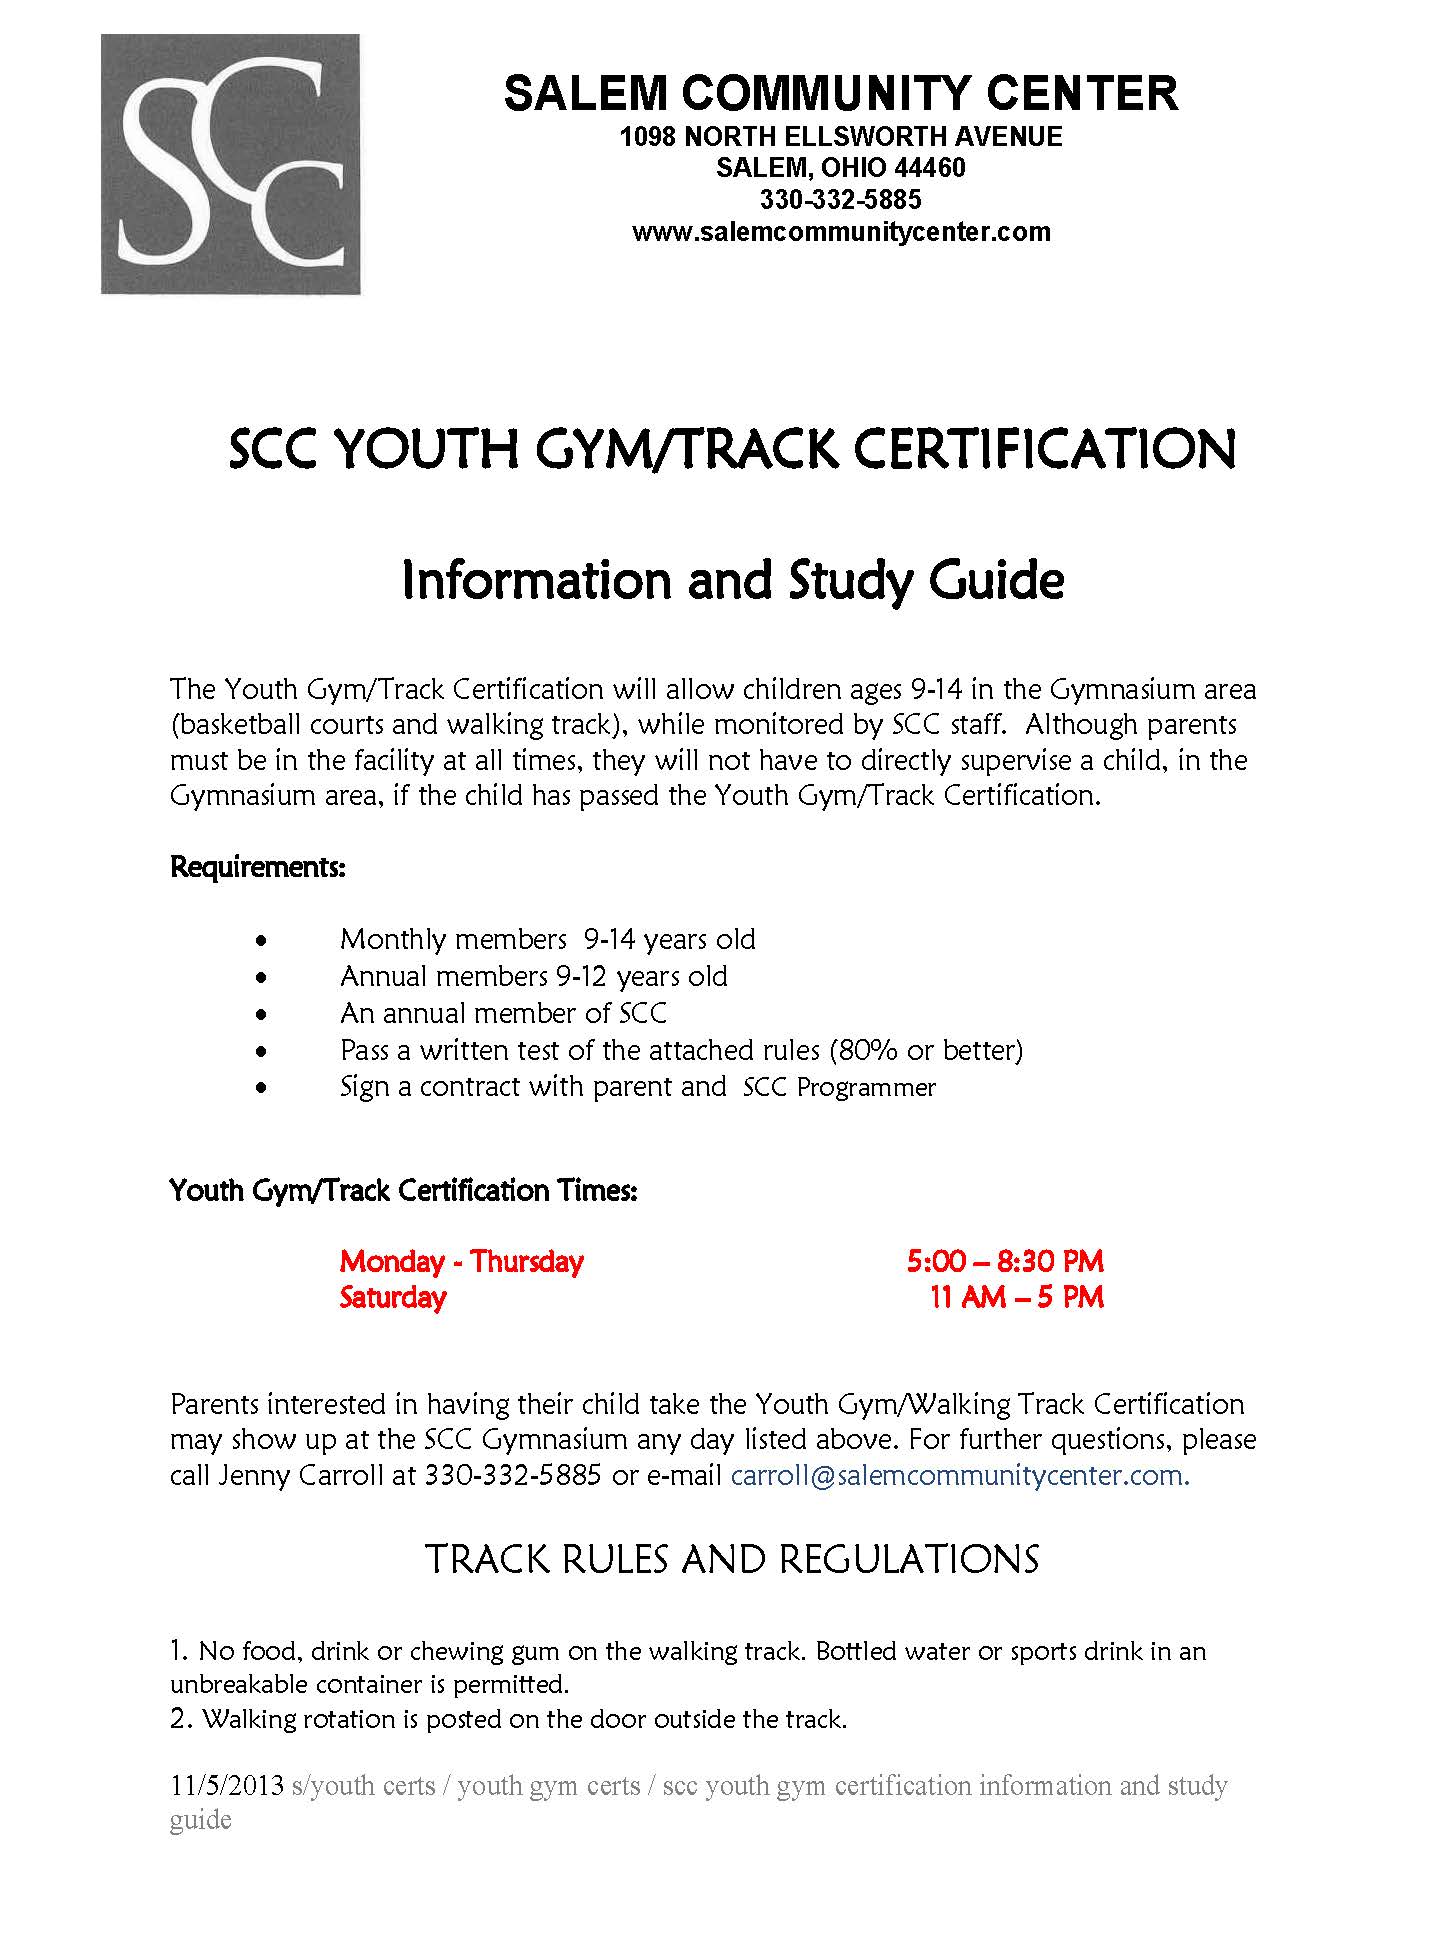 gym track certification Page 1